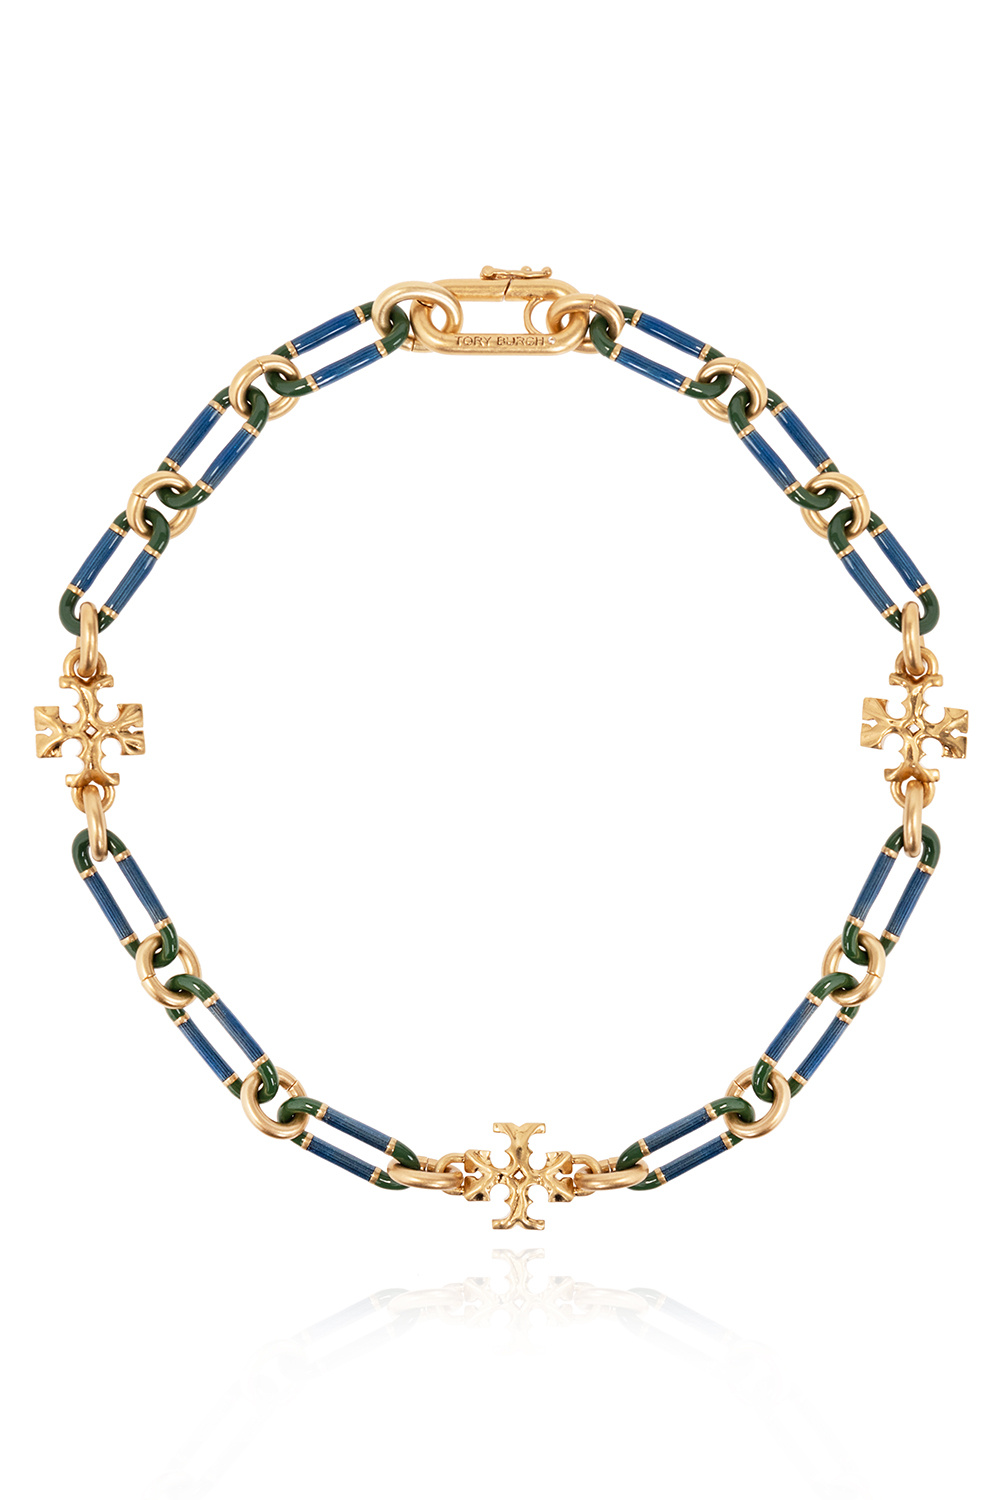 Tory Burch ‘Roxanne’ necklace